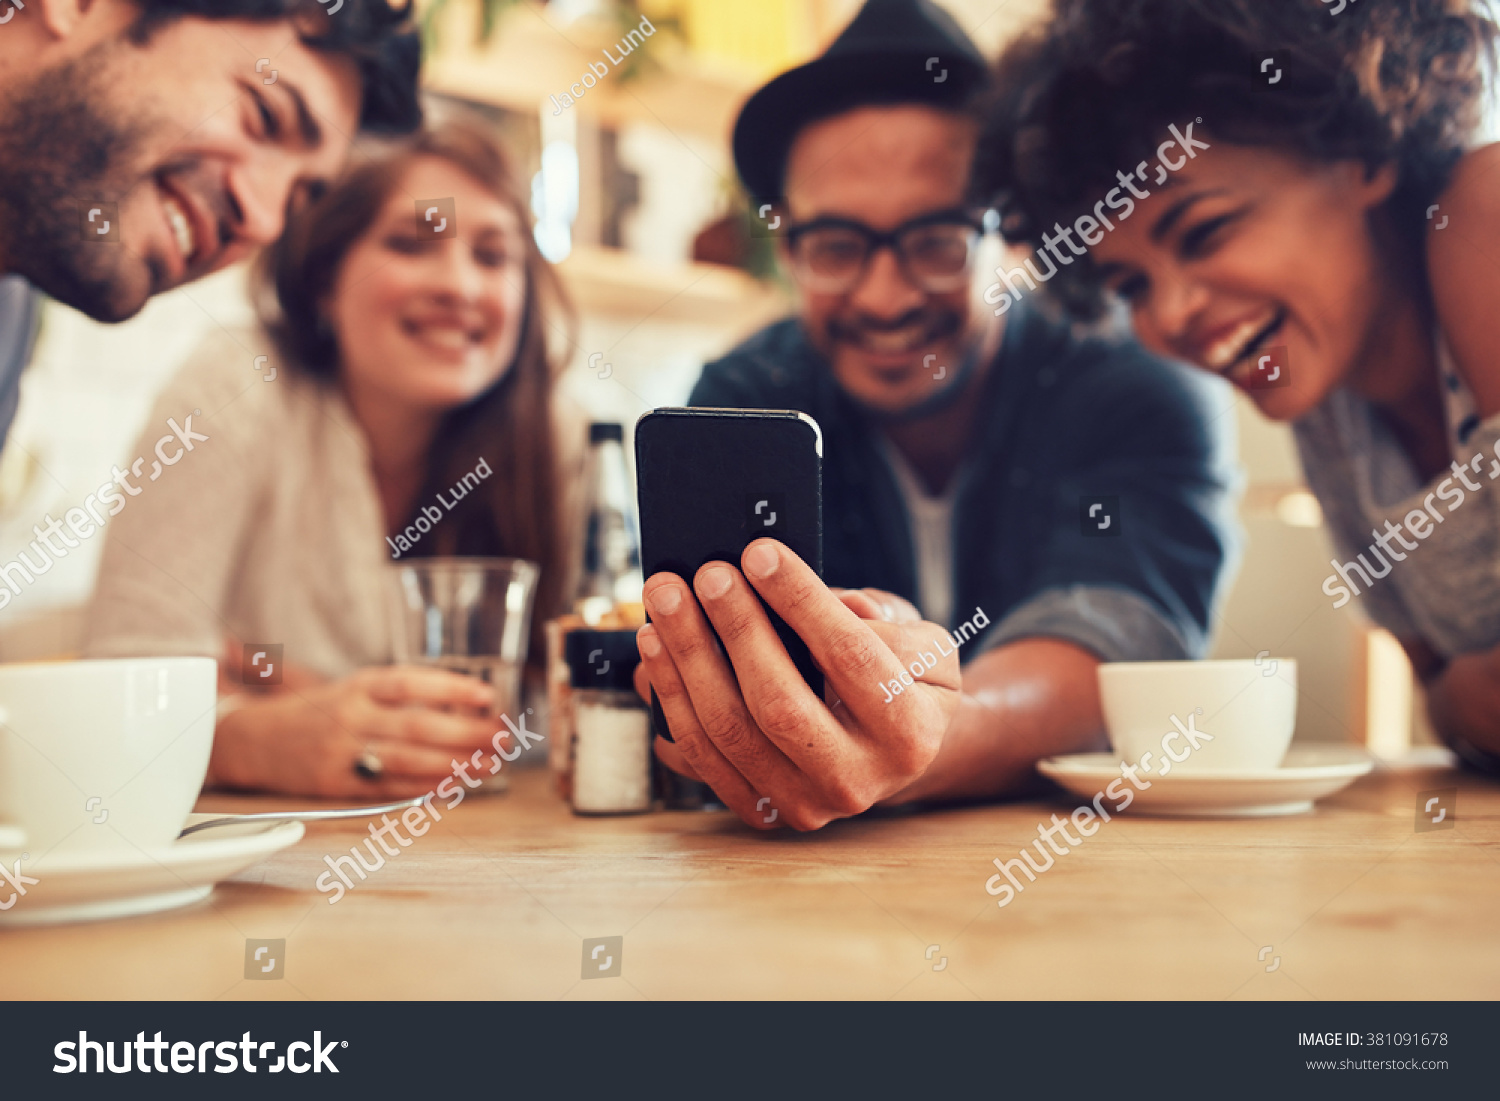 Group of friends having fun at the cafe and looking at smart phone. Man showing something to his friends sitting by, focus on mobile phone. #381091678